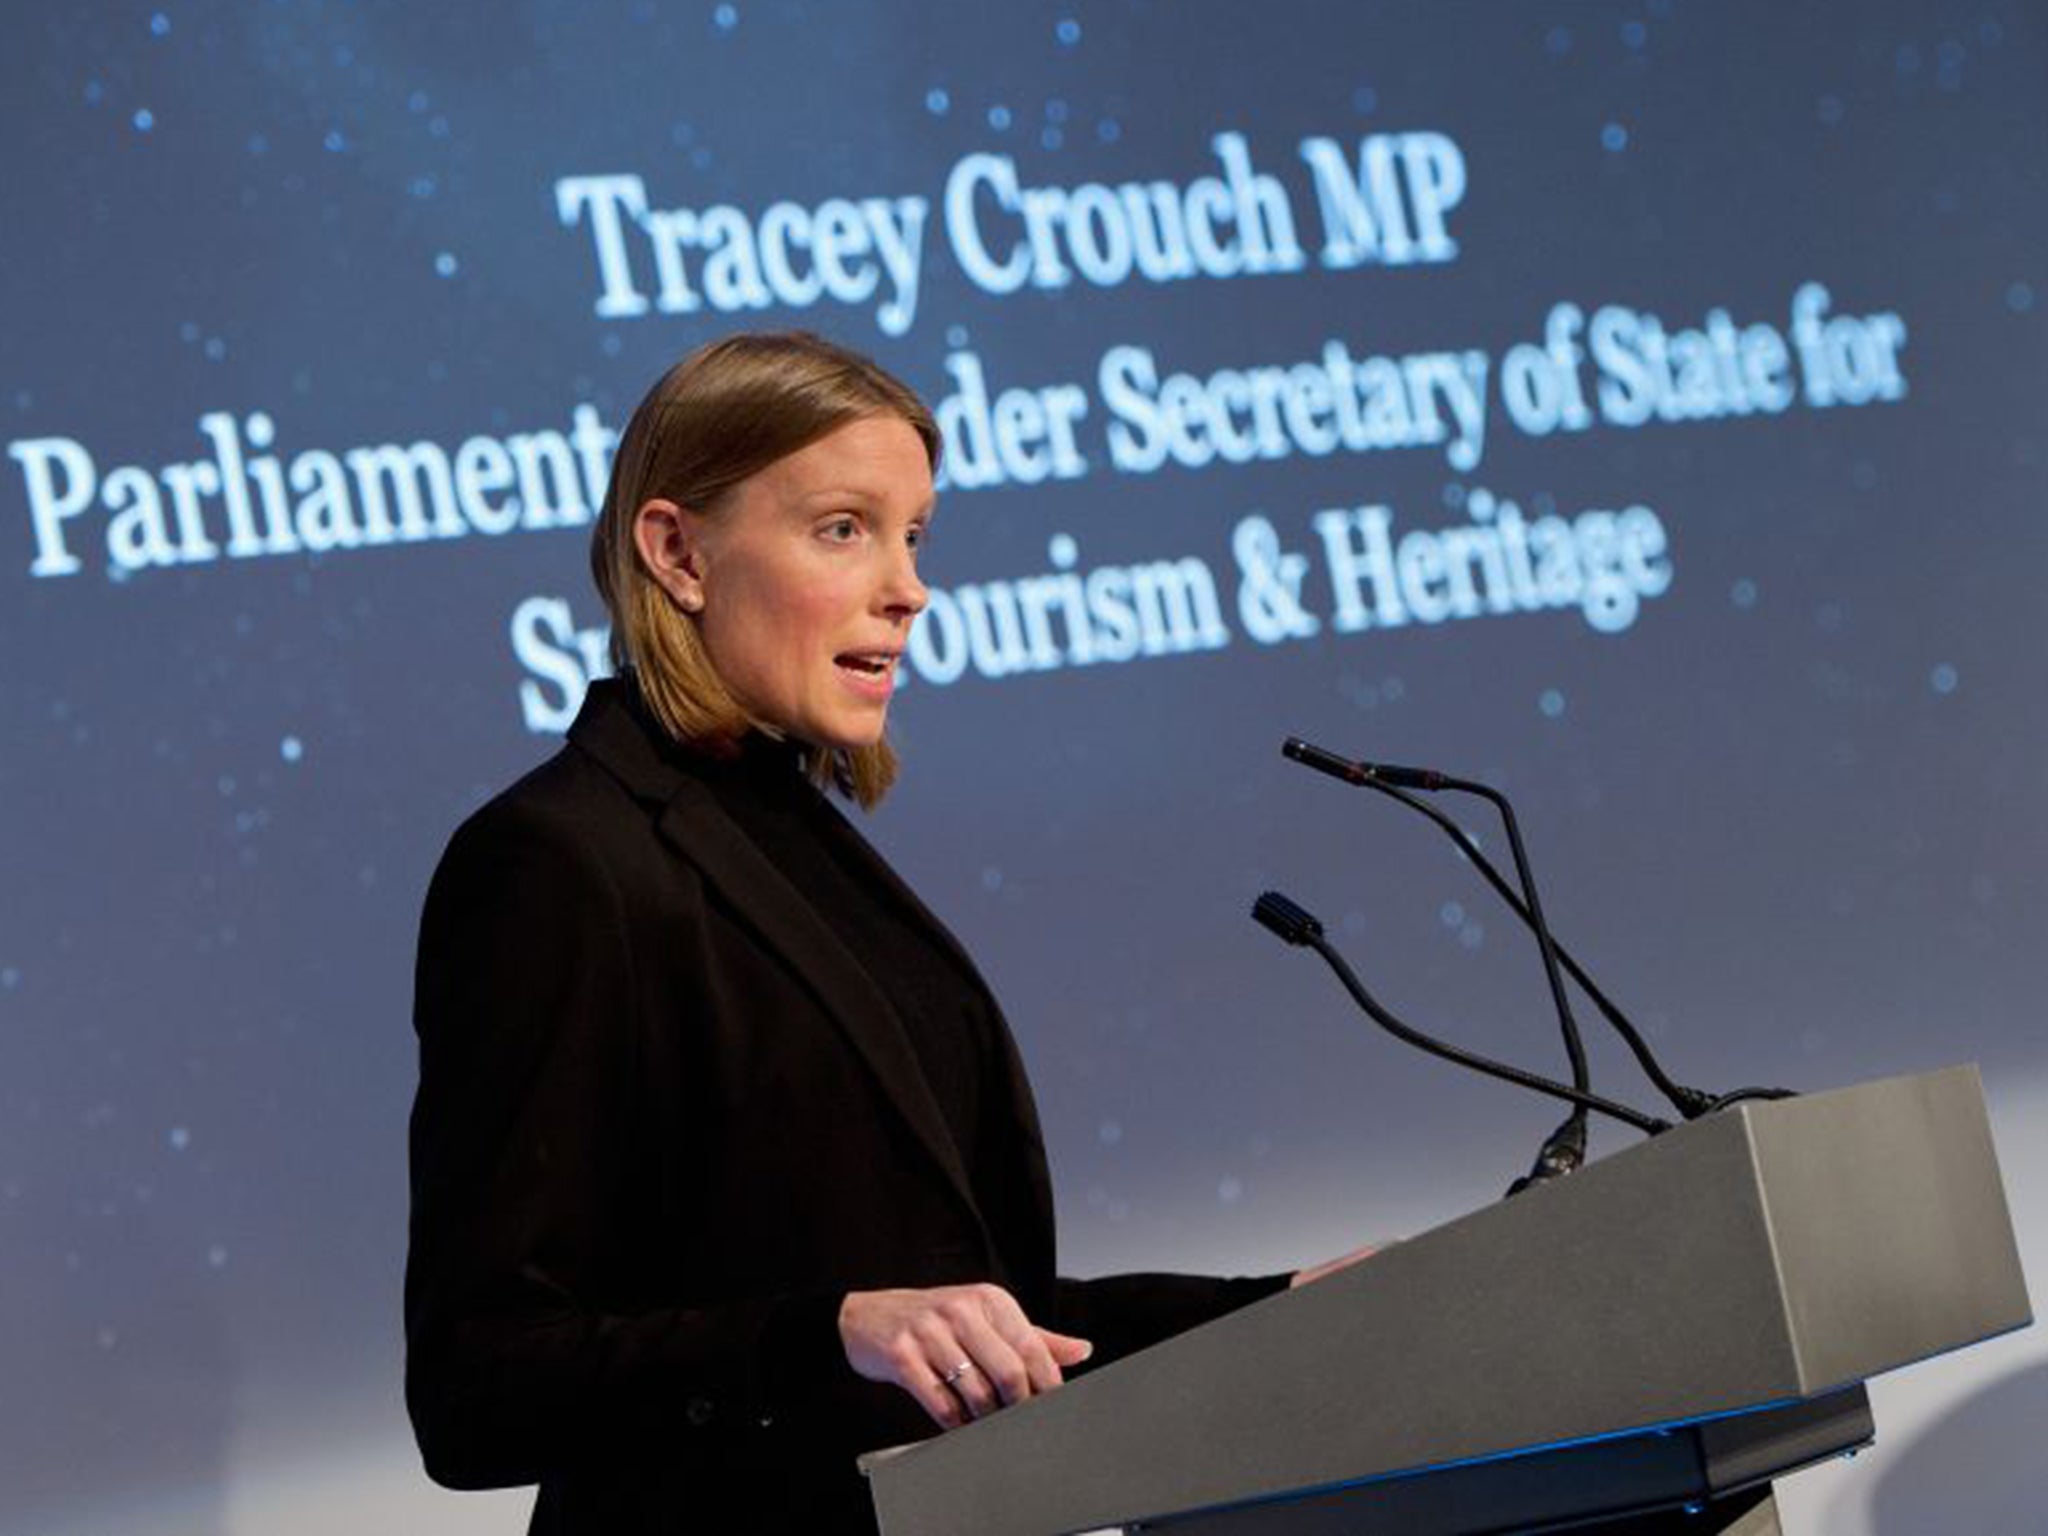 Tracey Crouch is the Under Secretary of State for Sport, Tourism and Heritage